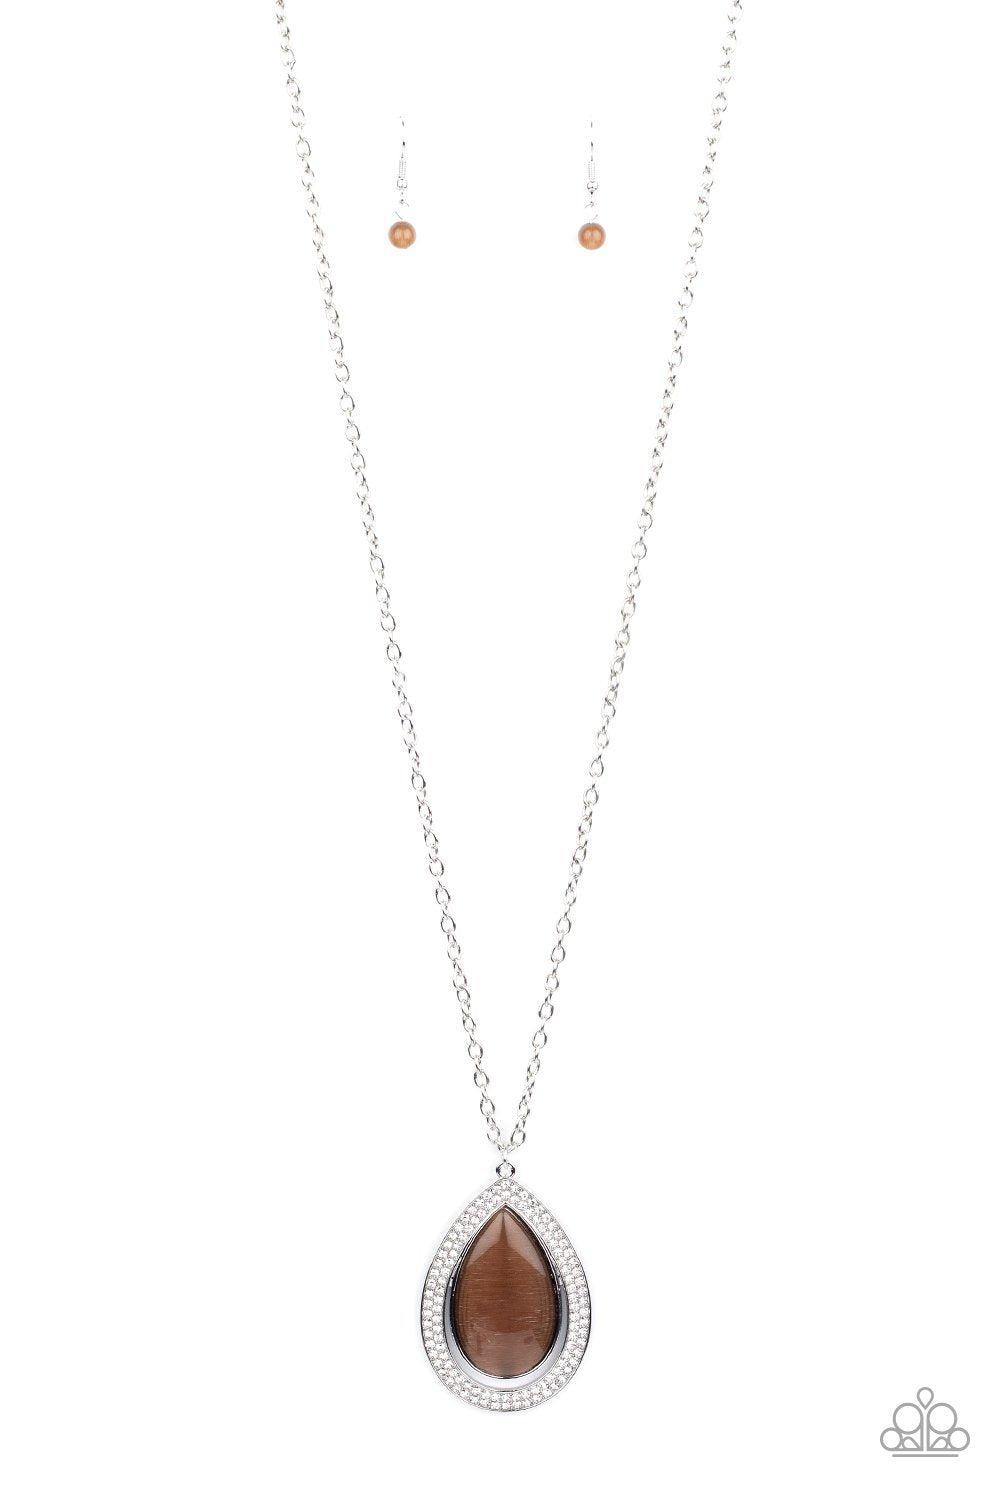 You Dropped This Brown Teardrop Cat&#39;s Eye Stone Necklace - Paparazzi Accessories-CarasShop.com - $5 Jewelry by Cara Jewels